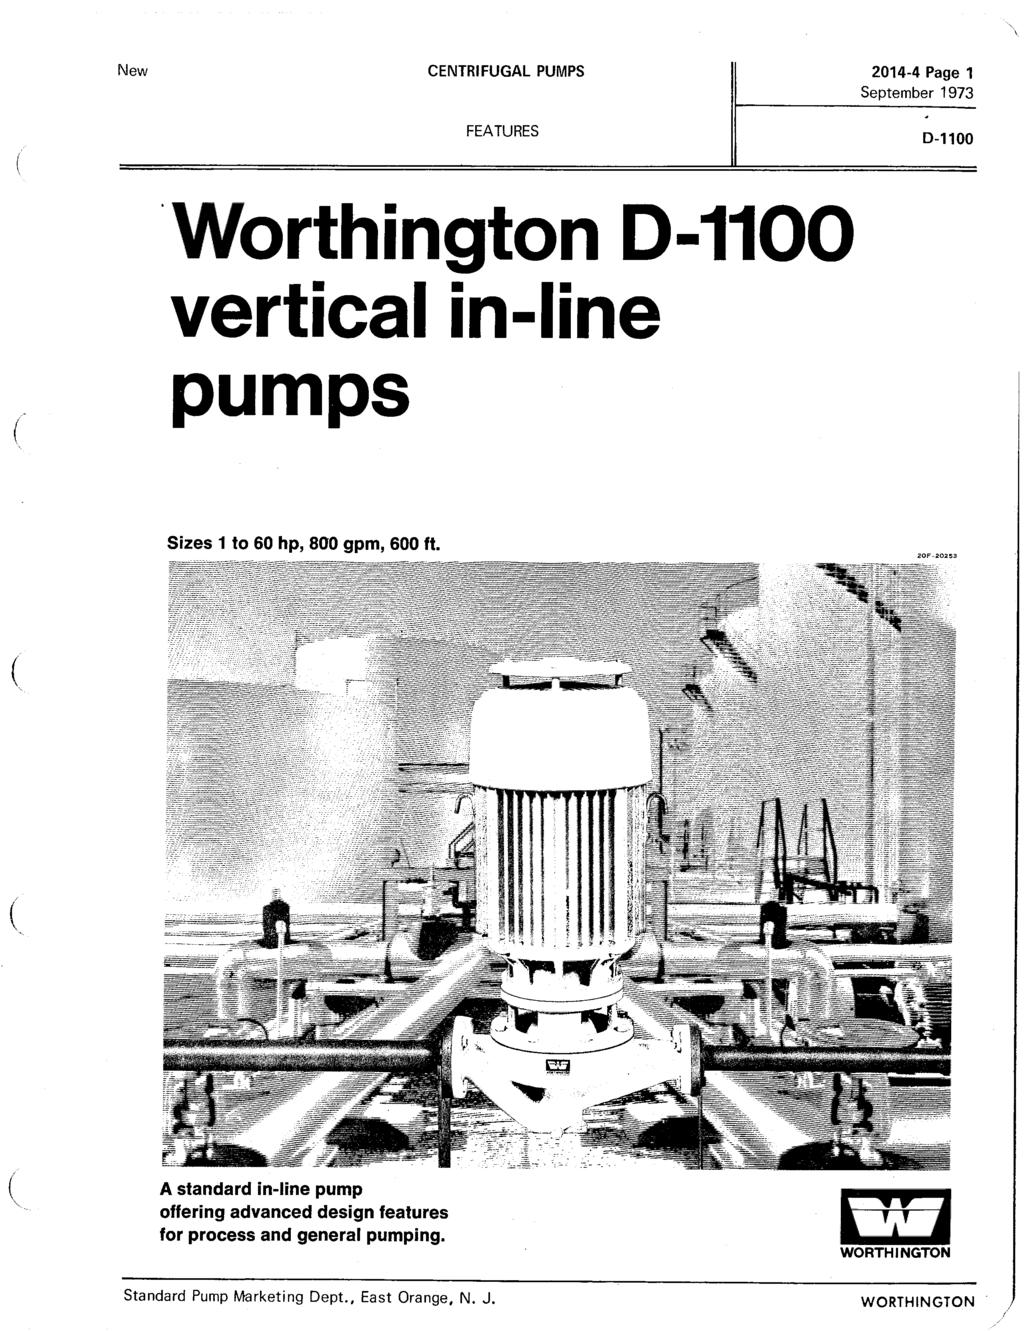 New CENTRIFUGAL PUMPS 2014-4 Page 1 FEATURES D-1100 Worthington D-1100 vertical in-line pumps Sizes 1 to 60 hp, 800 gpm, 600 ft.